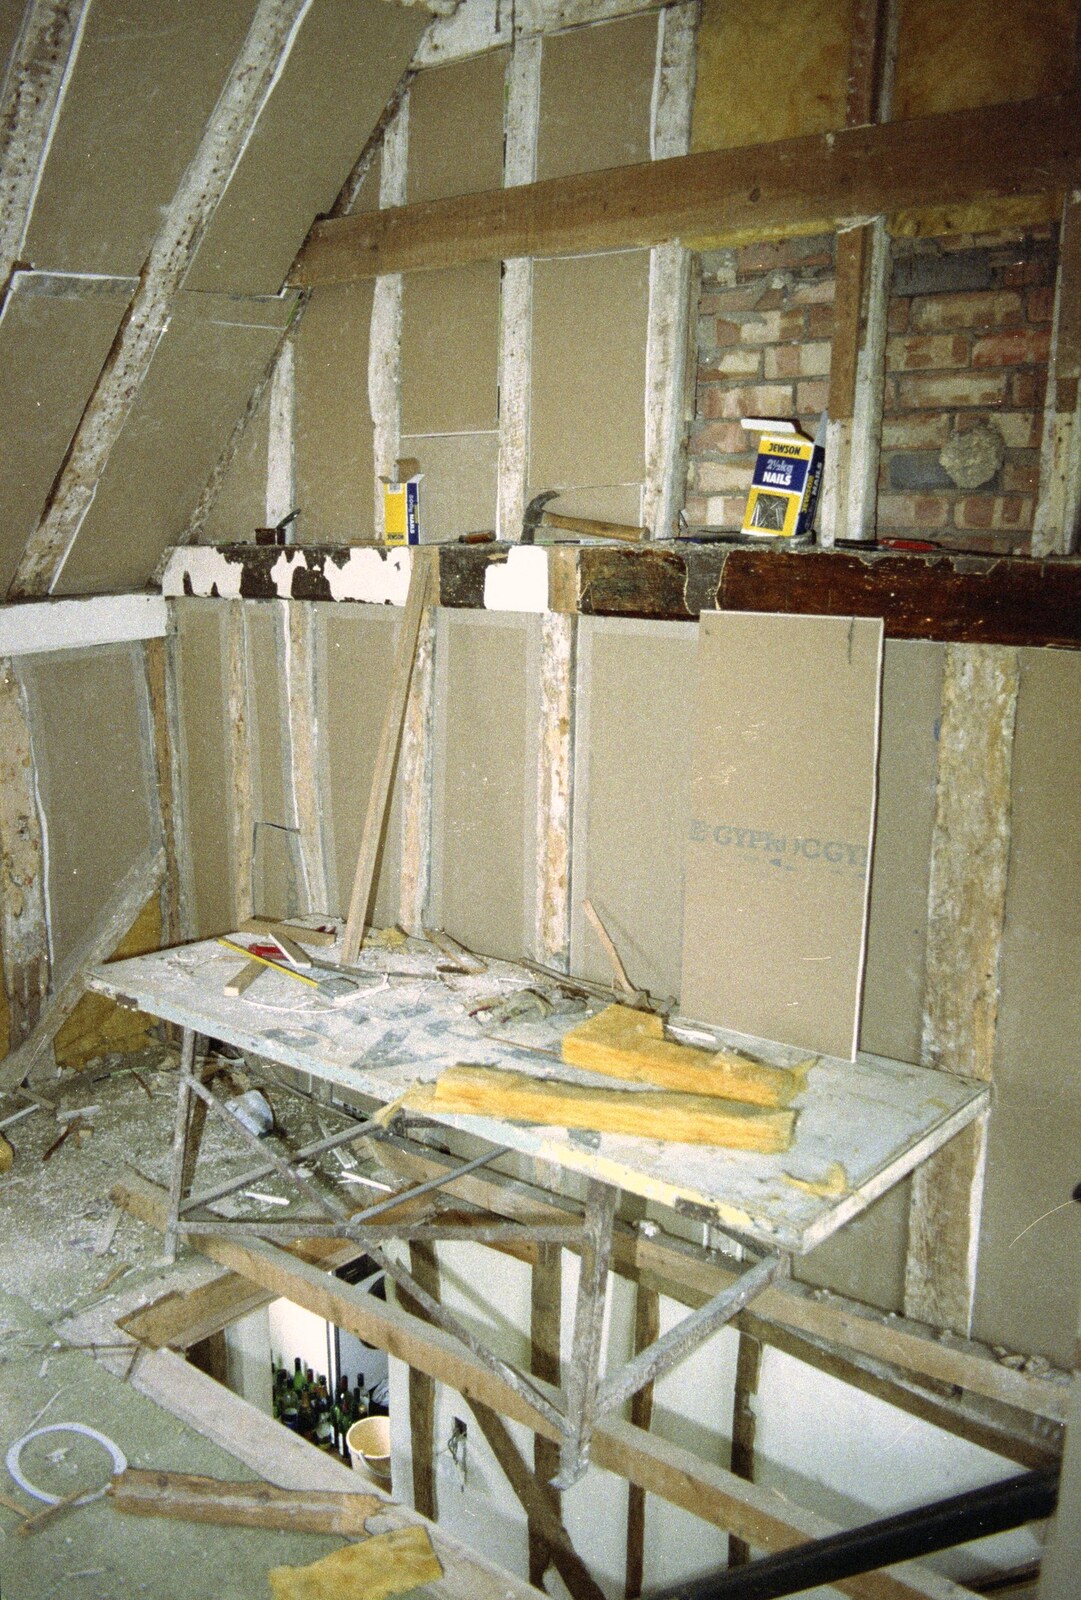 A sort-of table hangs precariously over the stairwell from Hale-Bopp and Bedroom Demolition, Brome, Suffolk - 10th May 1997